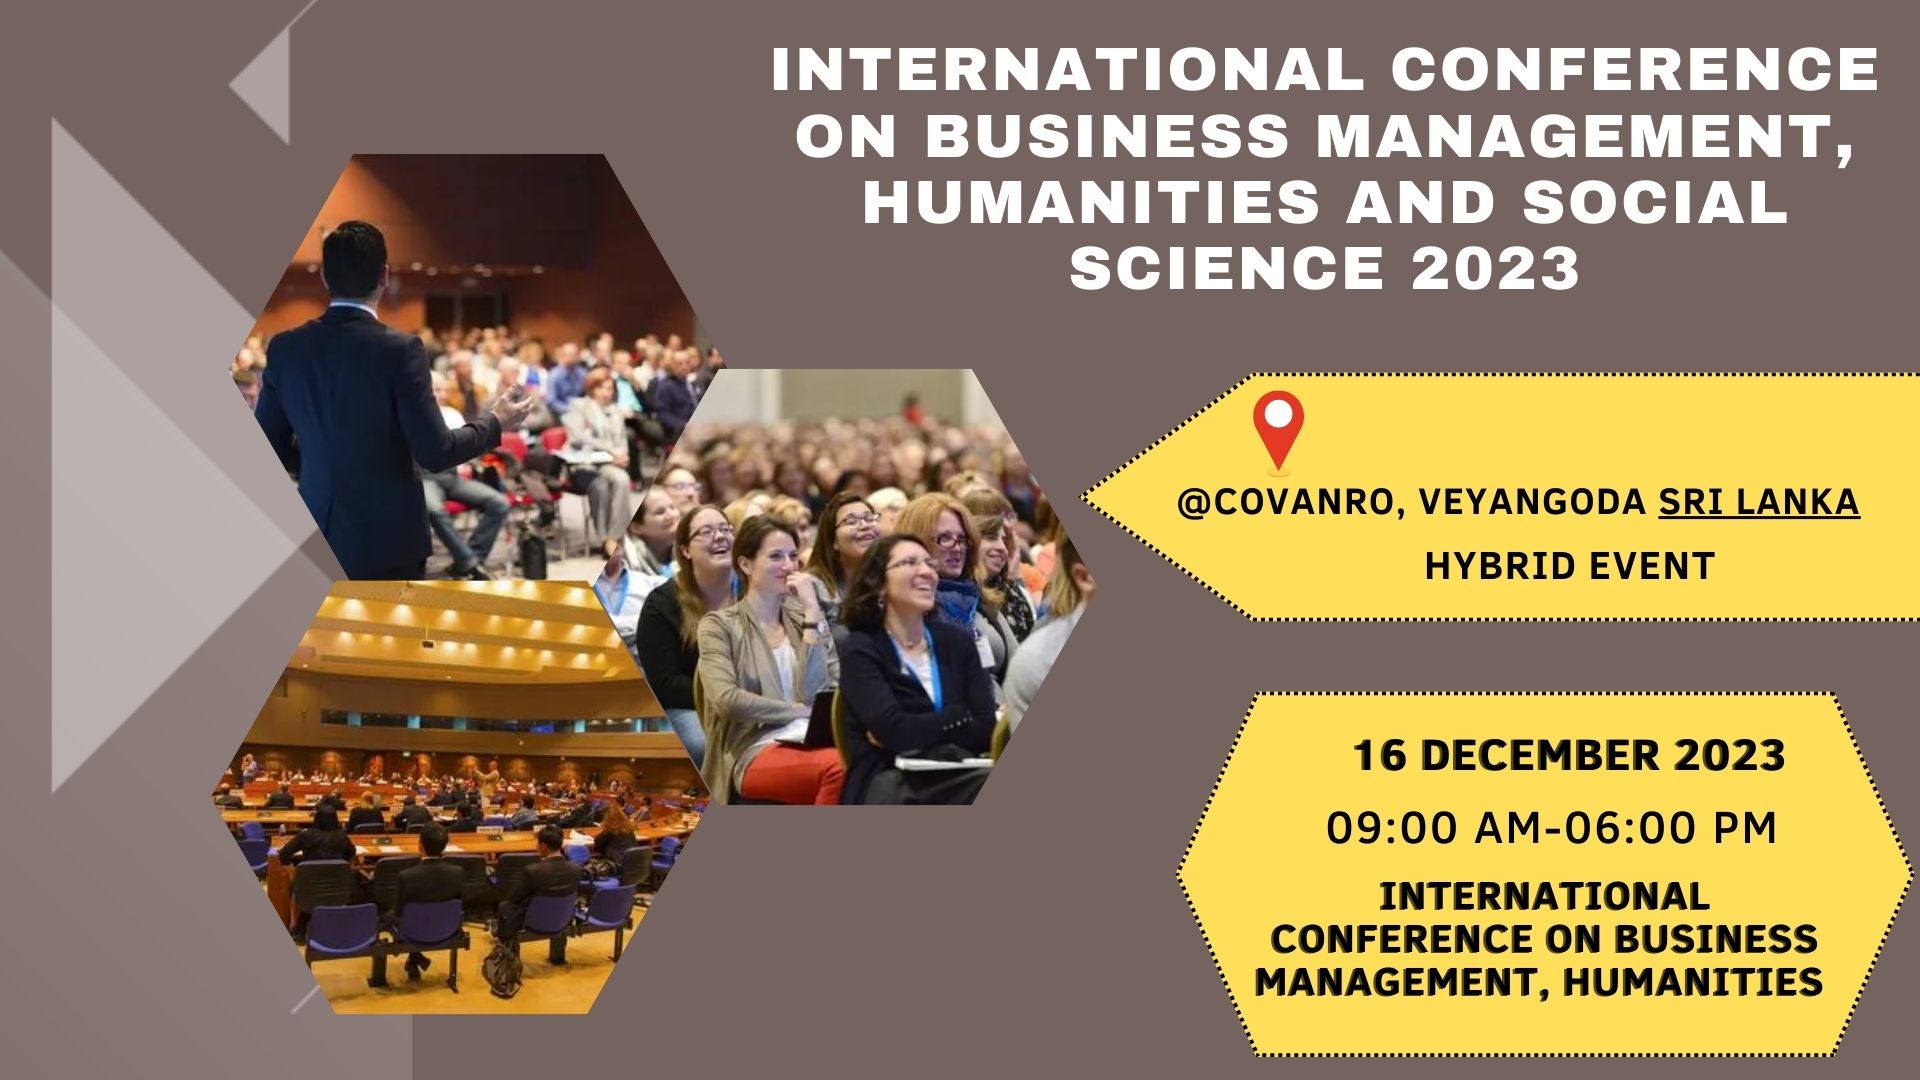 International Conference On Business Management, Humanities And Social Science 2023 Srilanka